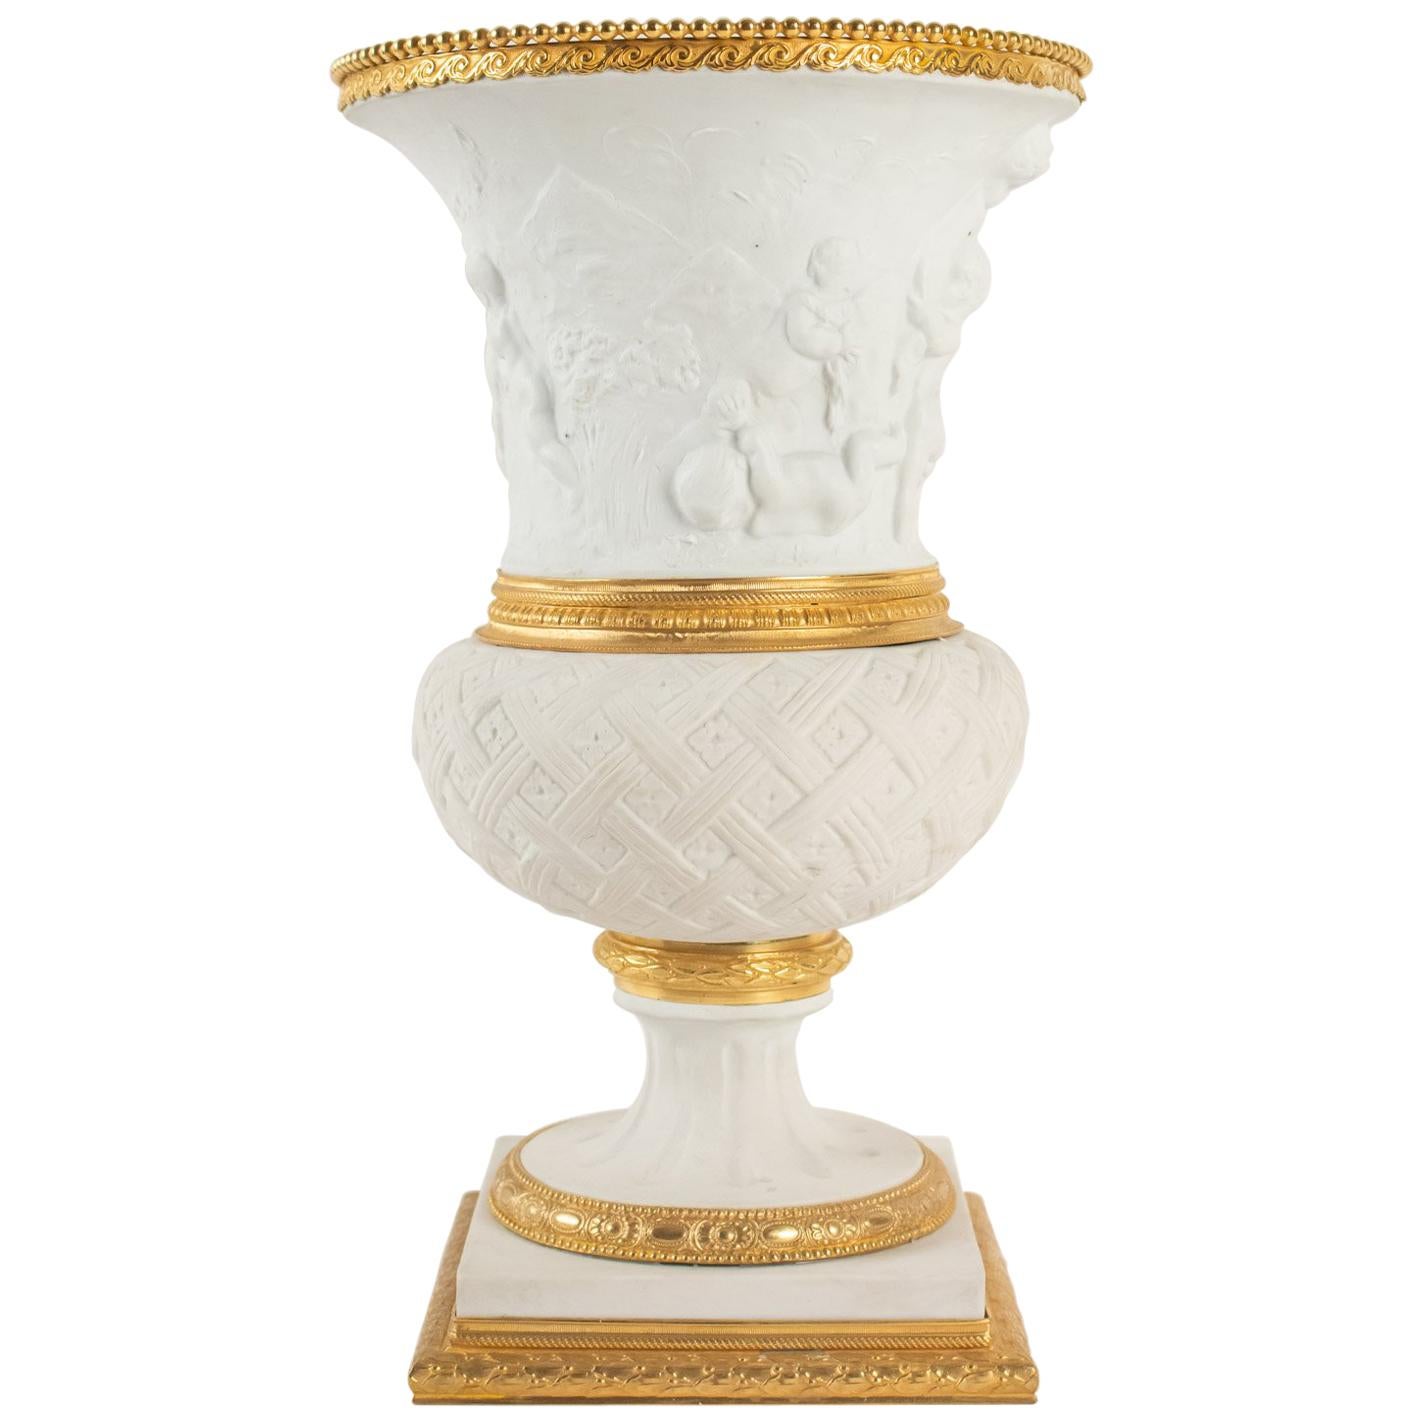 Medici Vase in Biscuit and Gilt Bronze, Early 20th Century Louis XVI Style